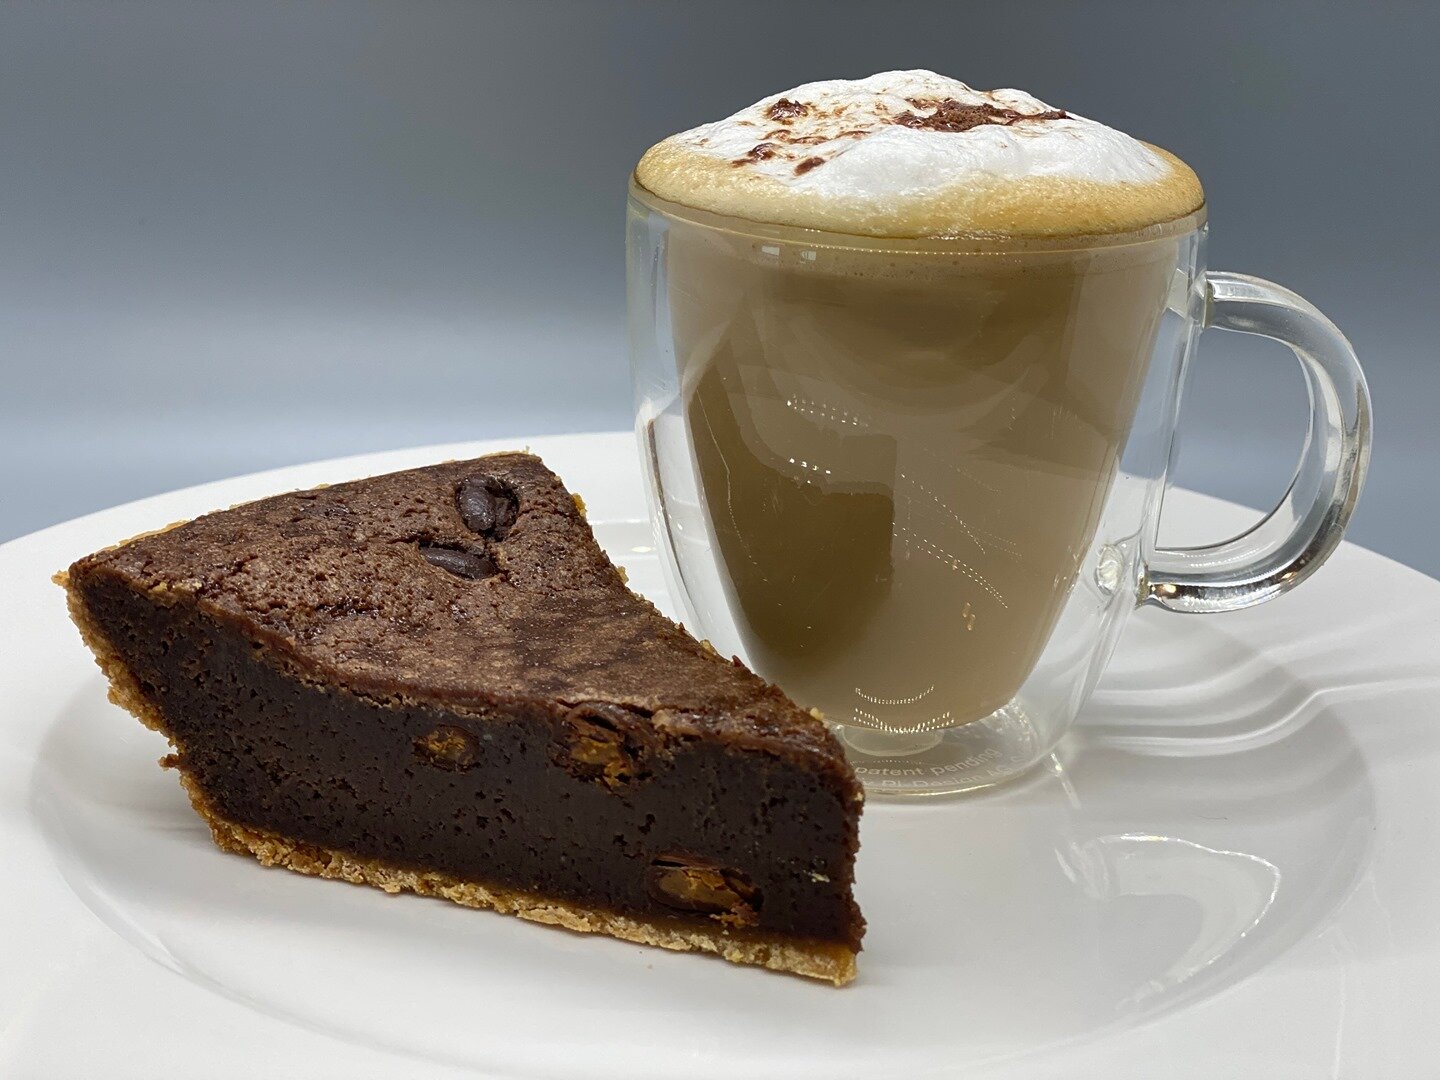 Our Mocha Chocolate Chip Pie goes great with a hot cup of Cappuccino 😉 Order now for the perfect family dinner dessert!